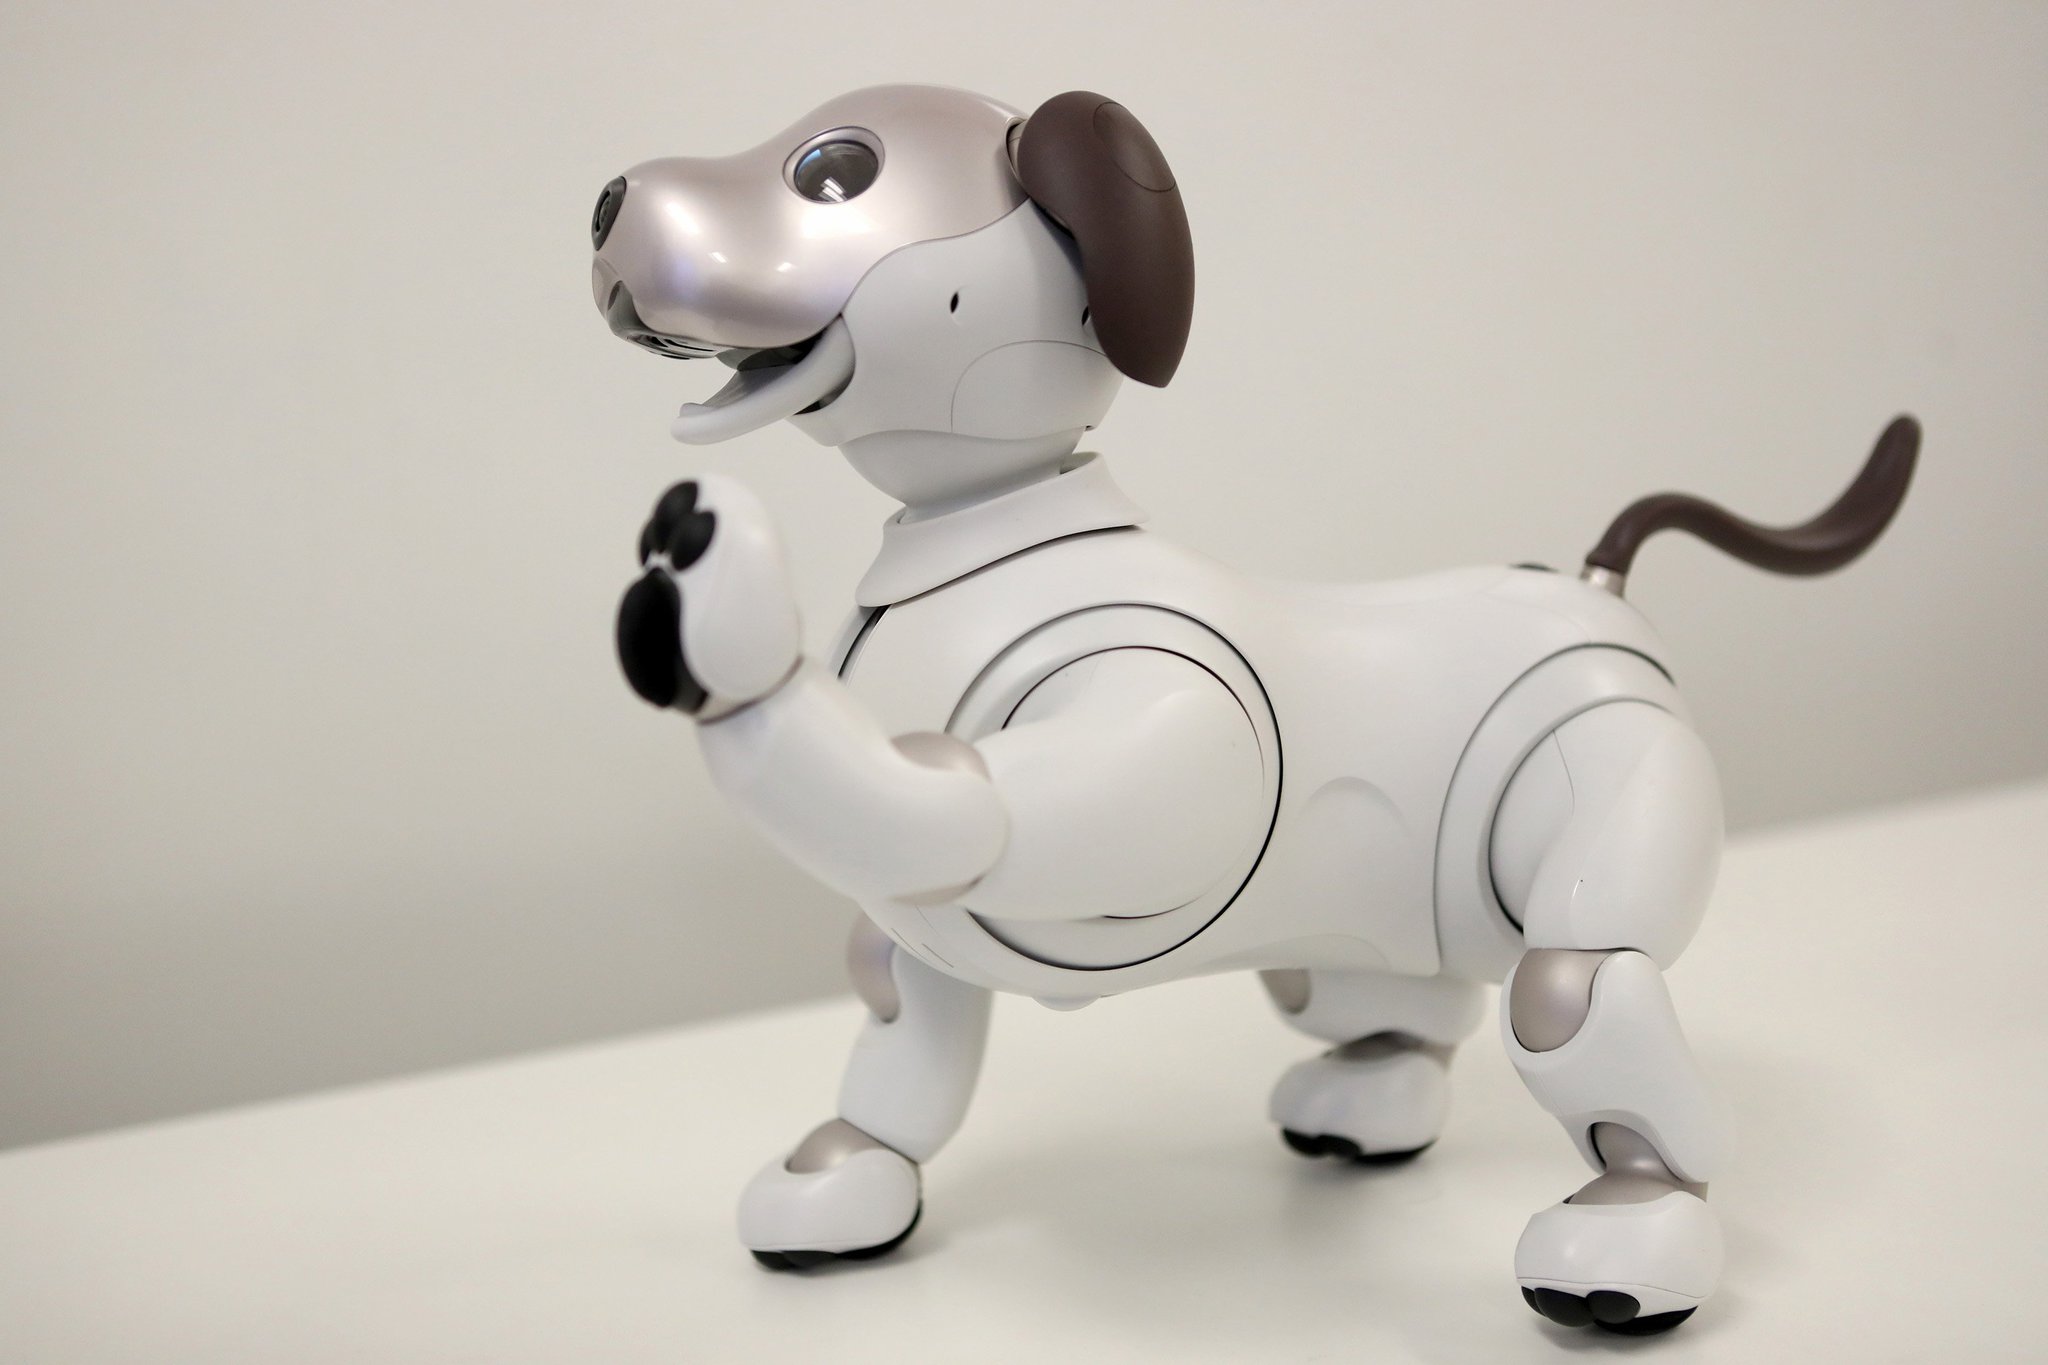 Sony's robotic can sit, fetch learn what its likes